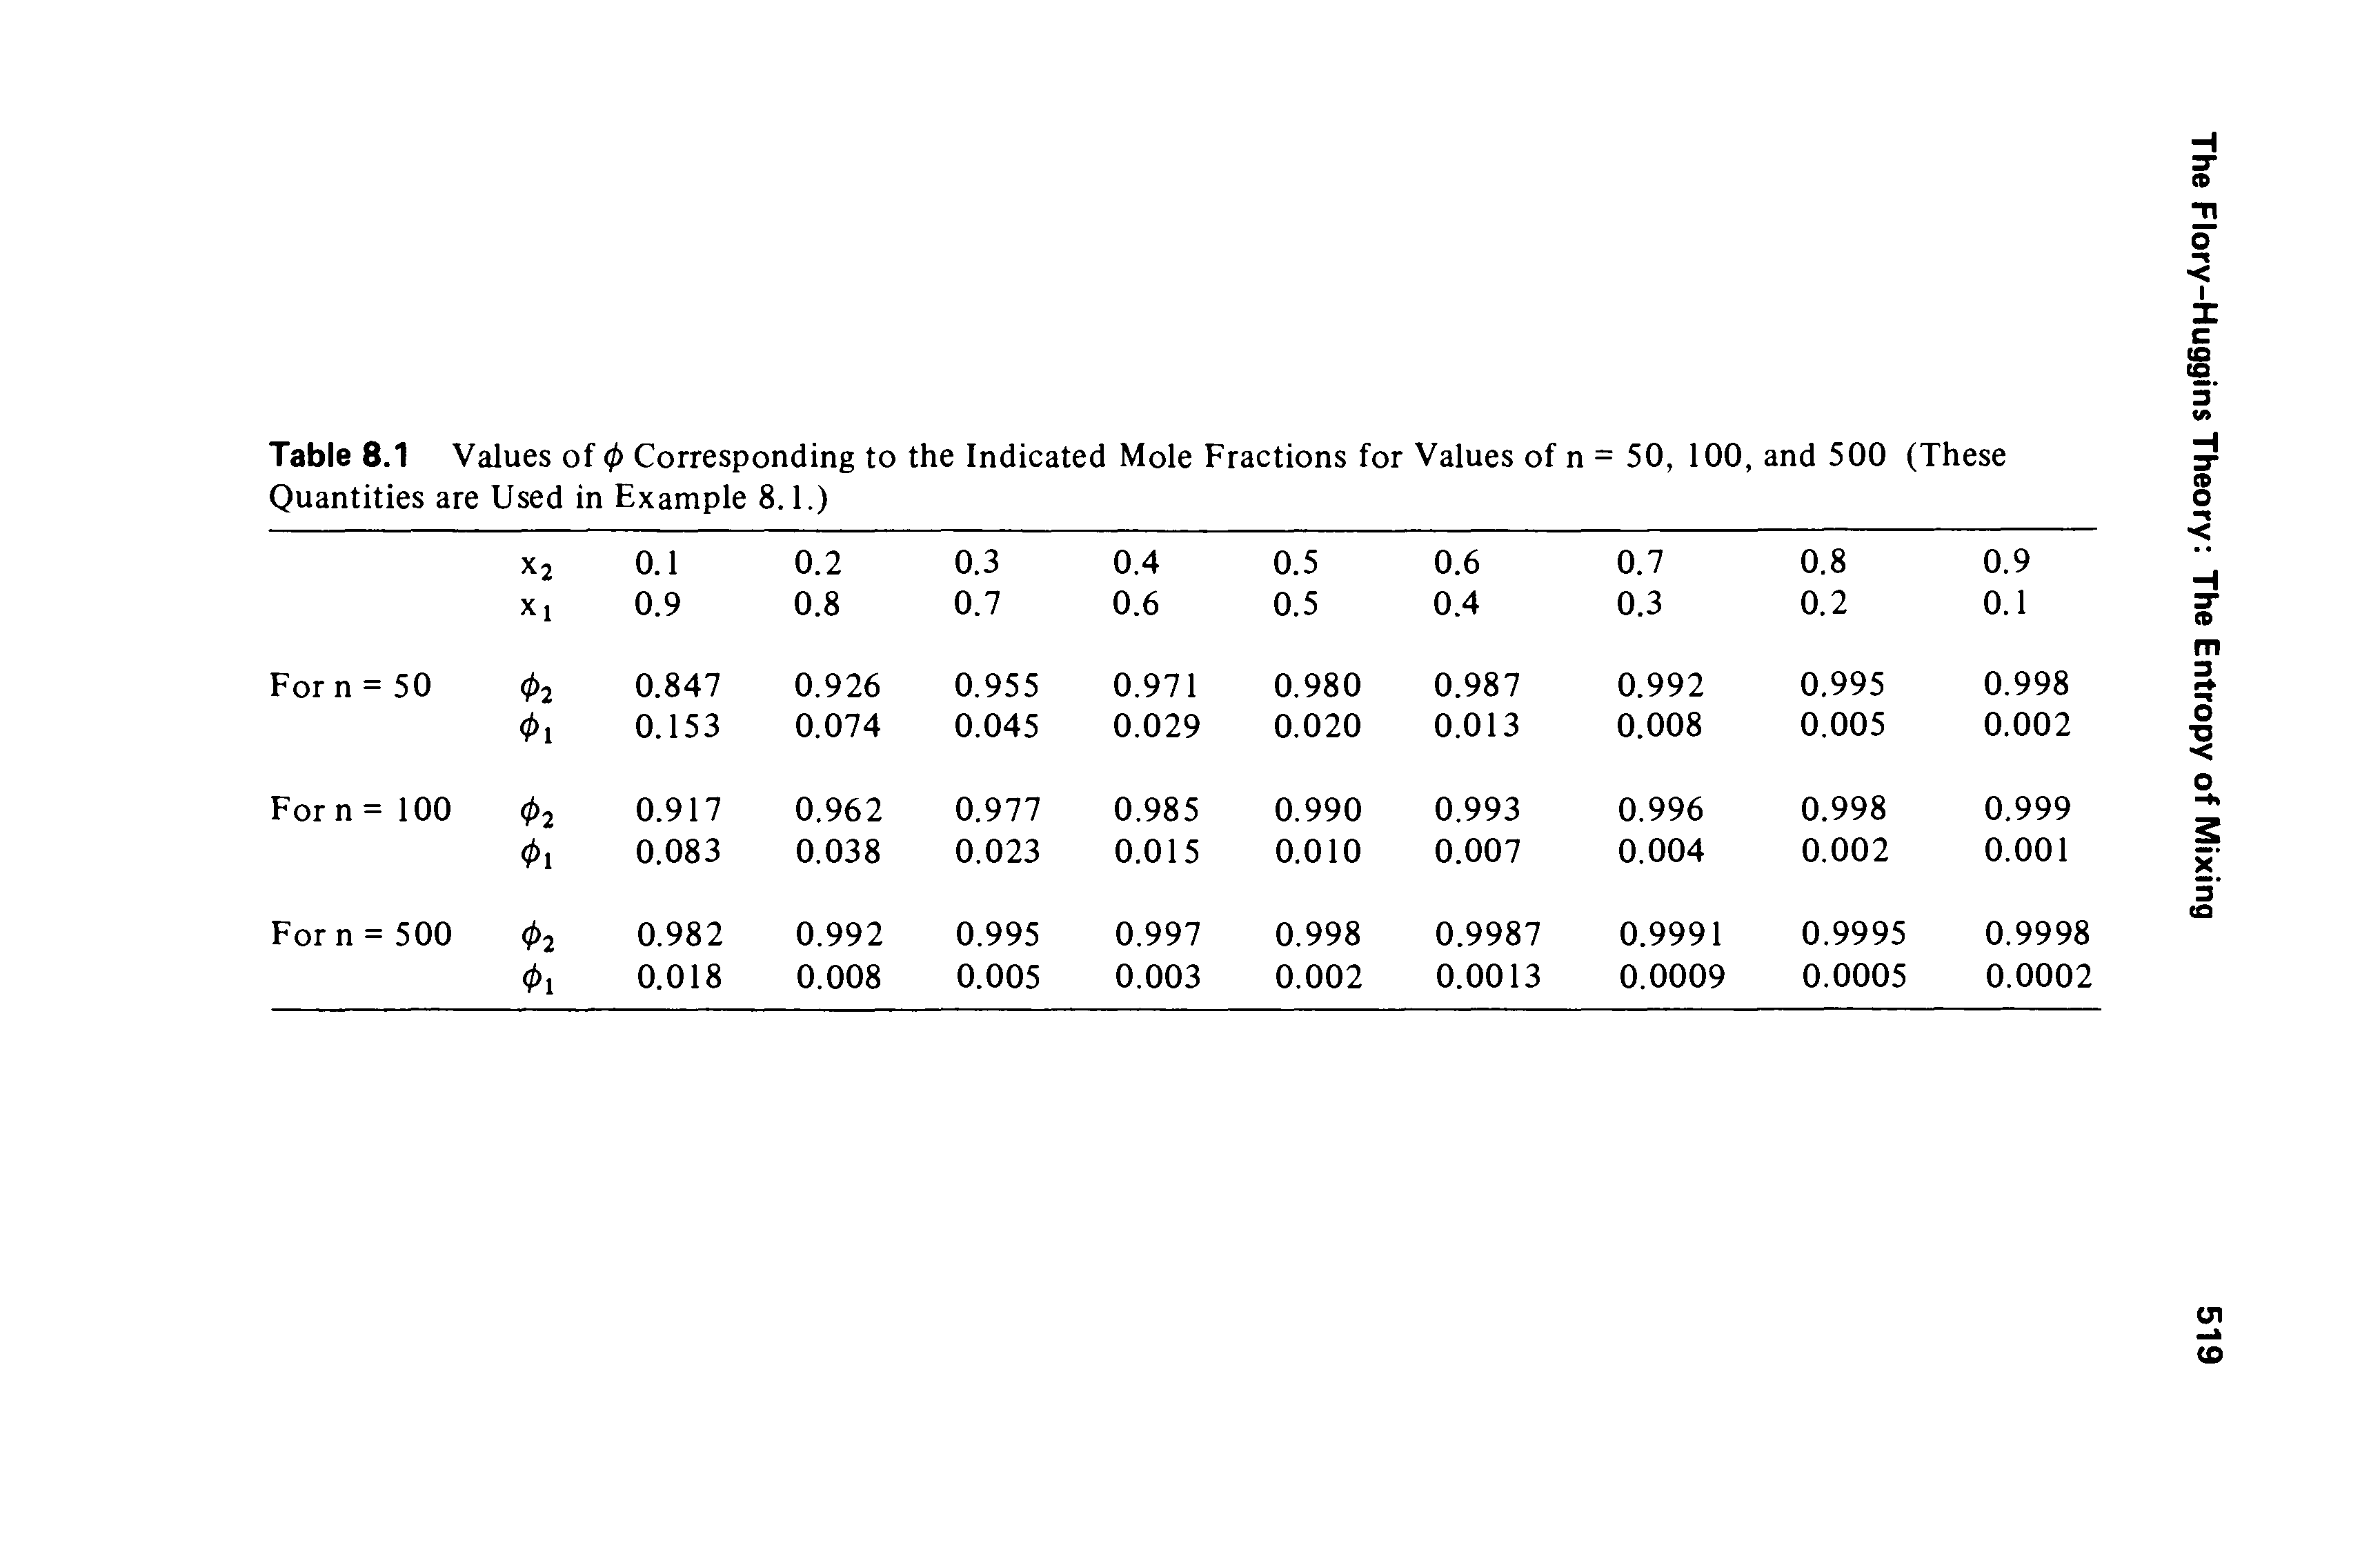 Table 8.1 Values of 0 Corresponding to the Indicated Mole Fractions for Values of n = 50, 100, and 500 (These Quantities are Used in Example 8.1.)...